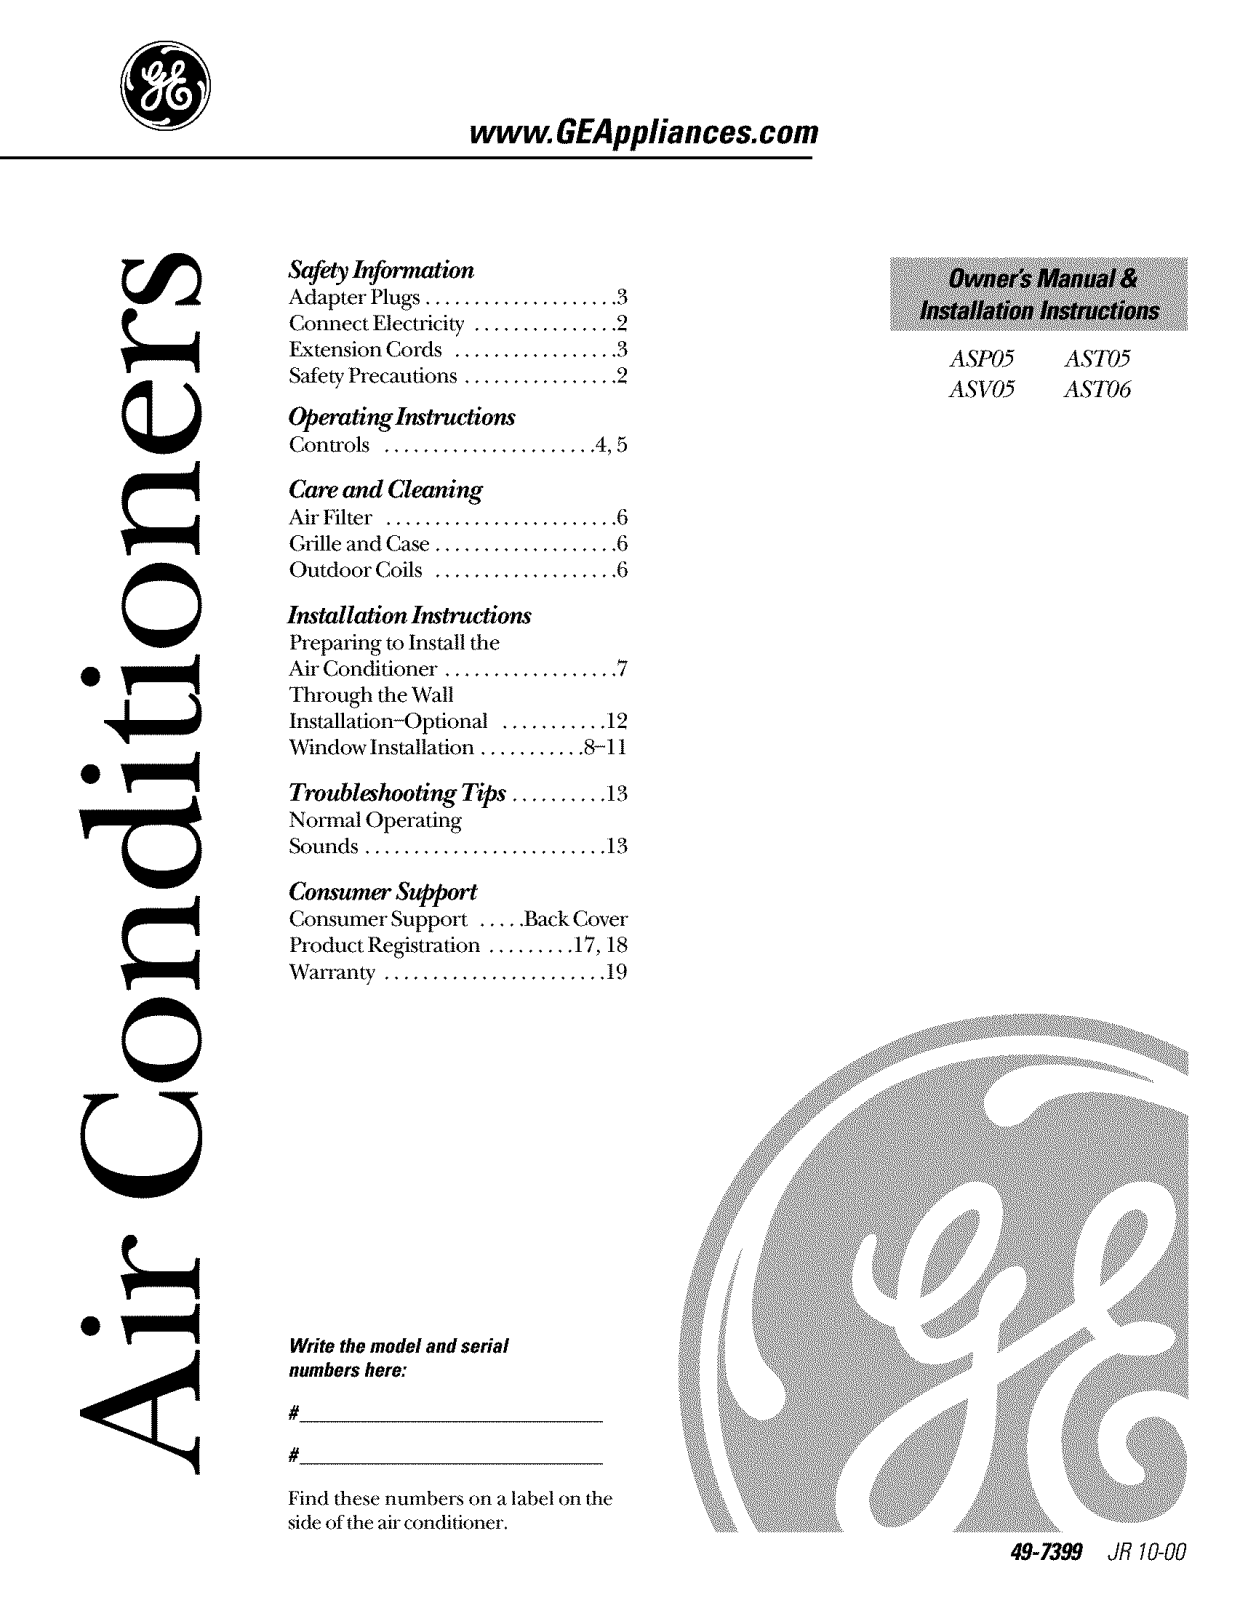 GE AST05LCS1, ASP05LCS1, ASV05LCS1 Owner’s Manual